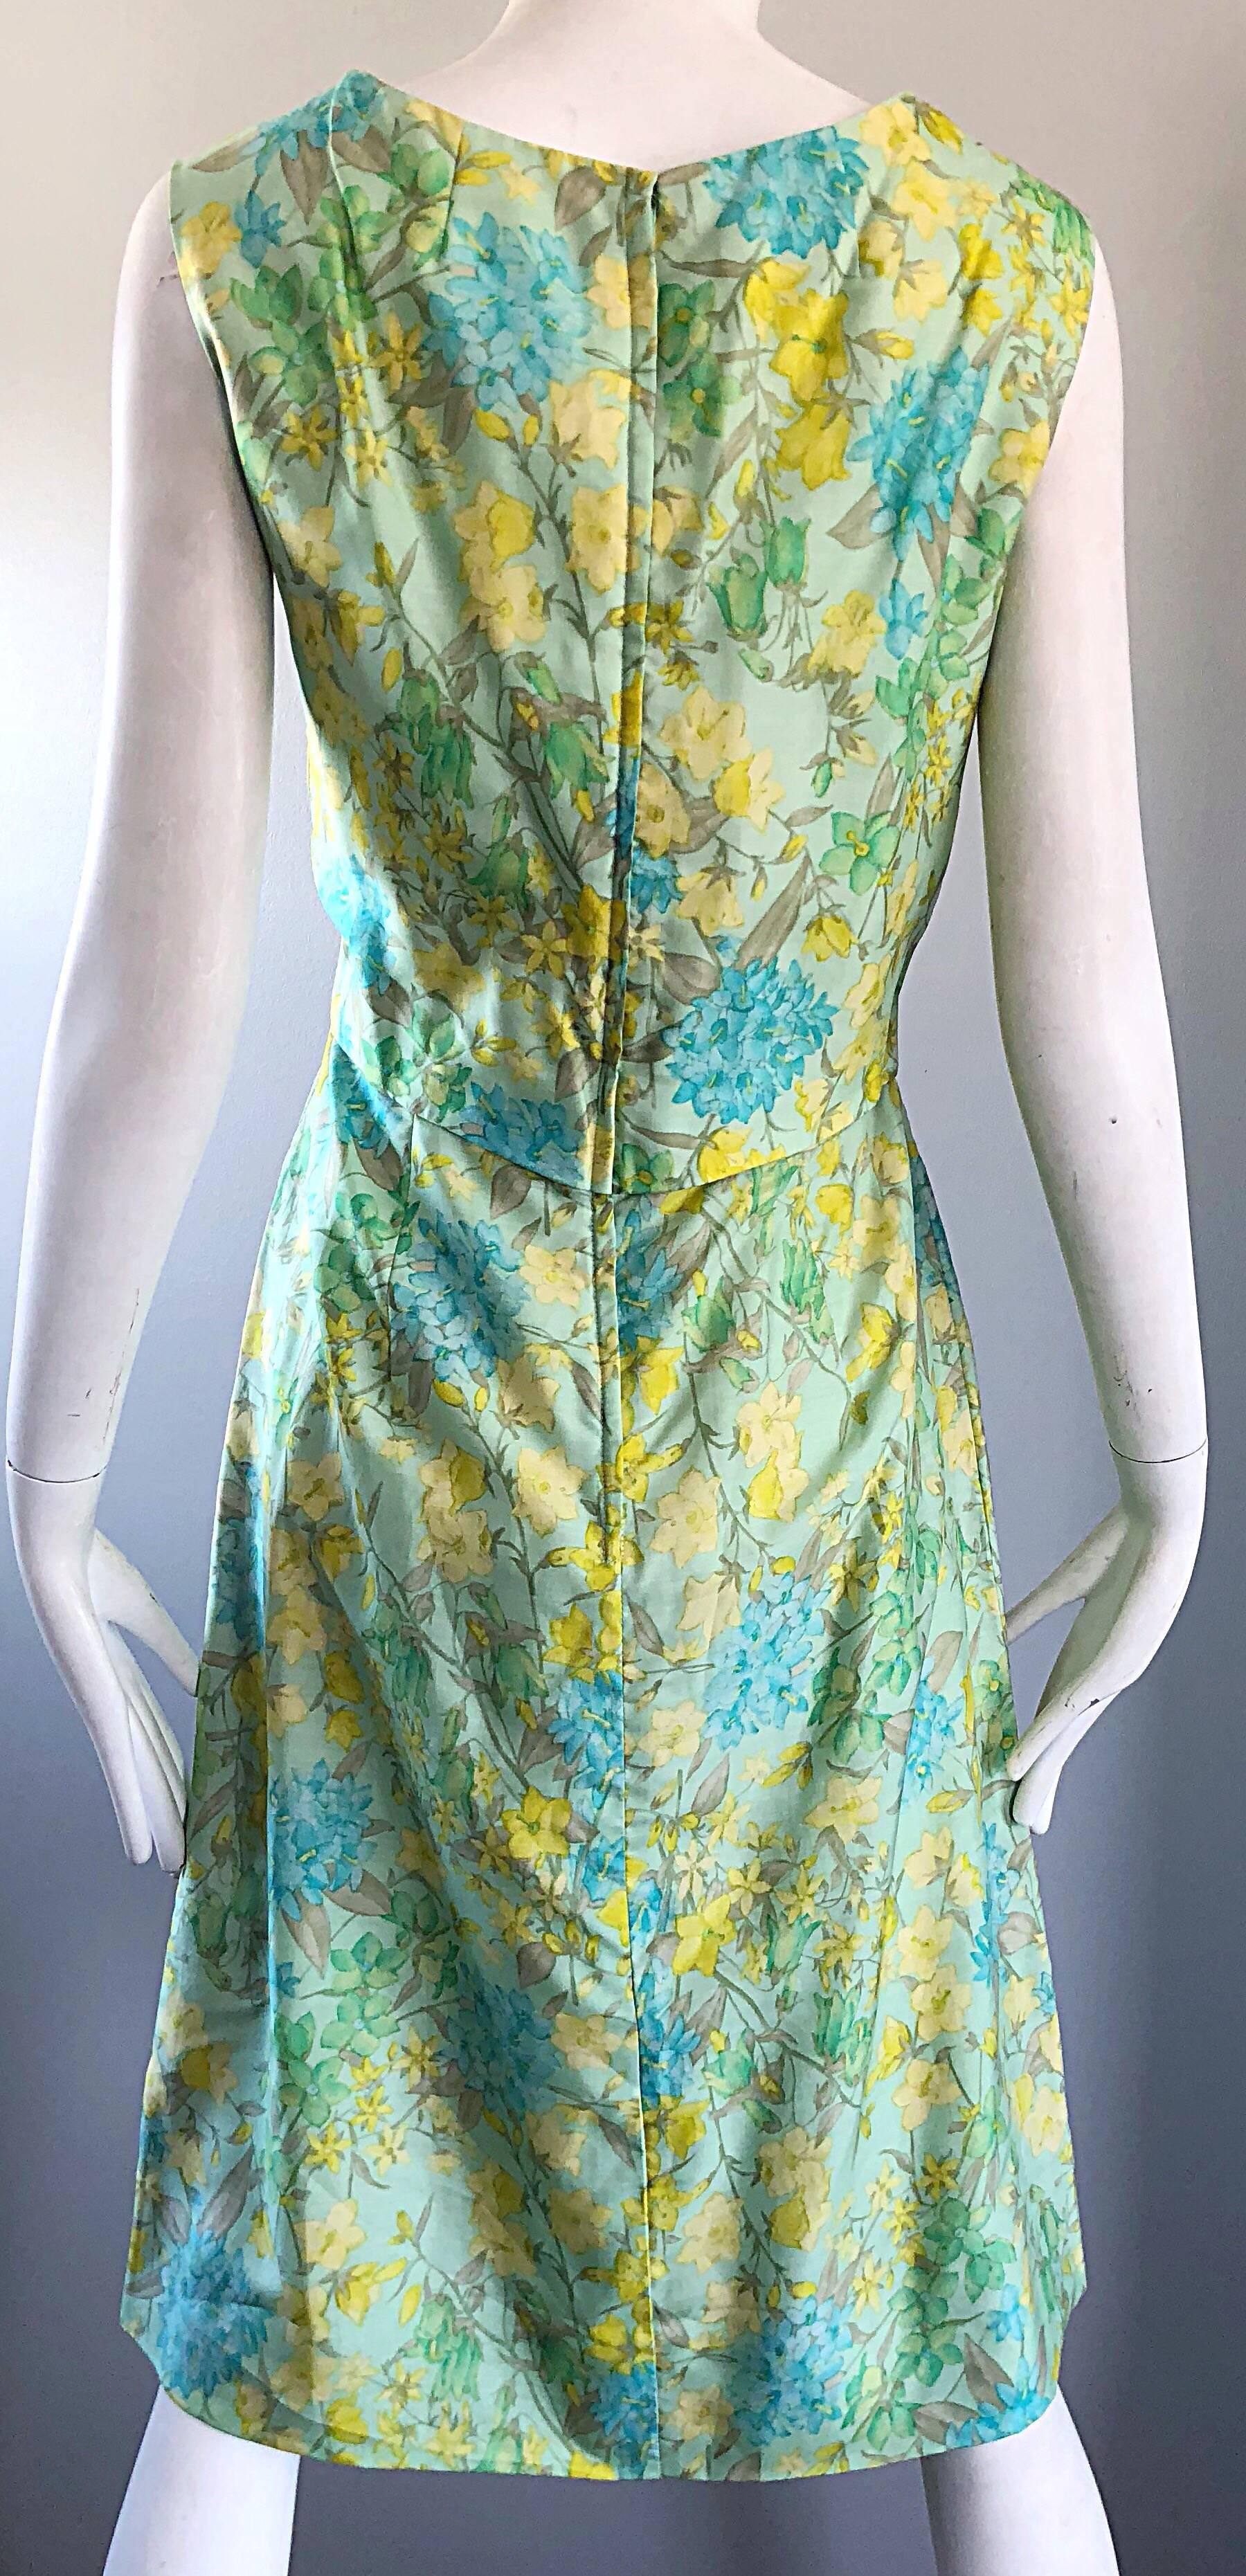 House of Lord's 1960s Blue Yellow Green Chic Pastel Vintage 60s Silk Shift Dress For Sale 2